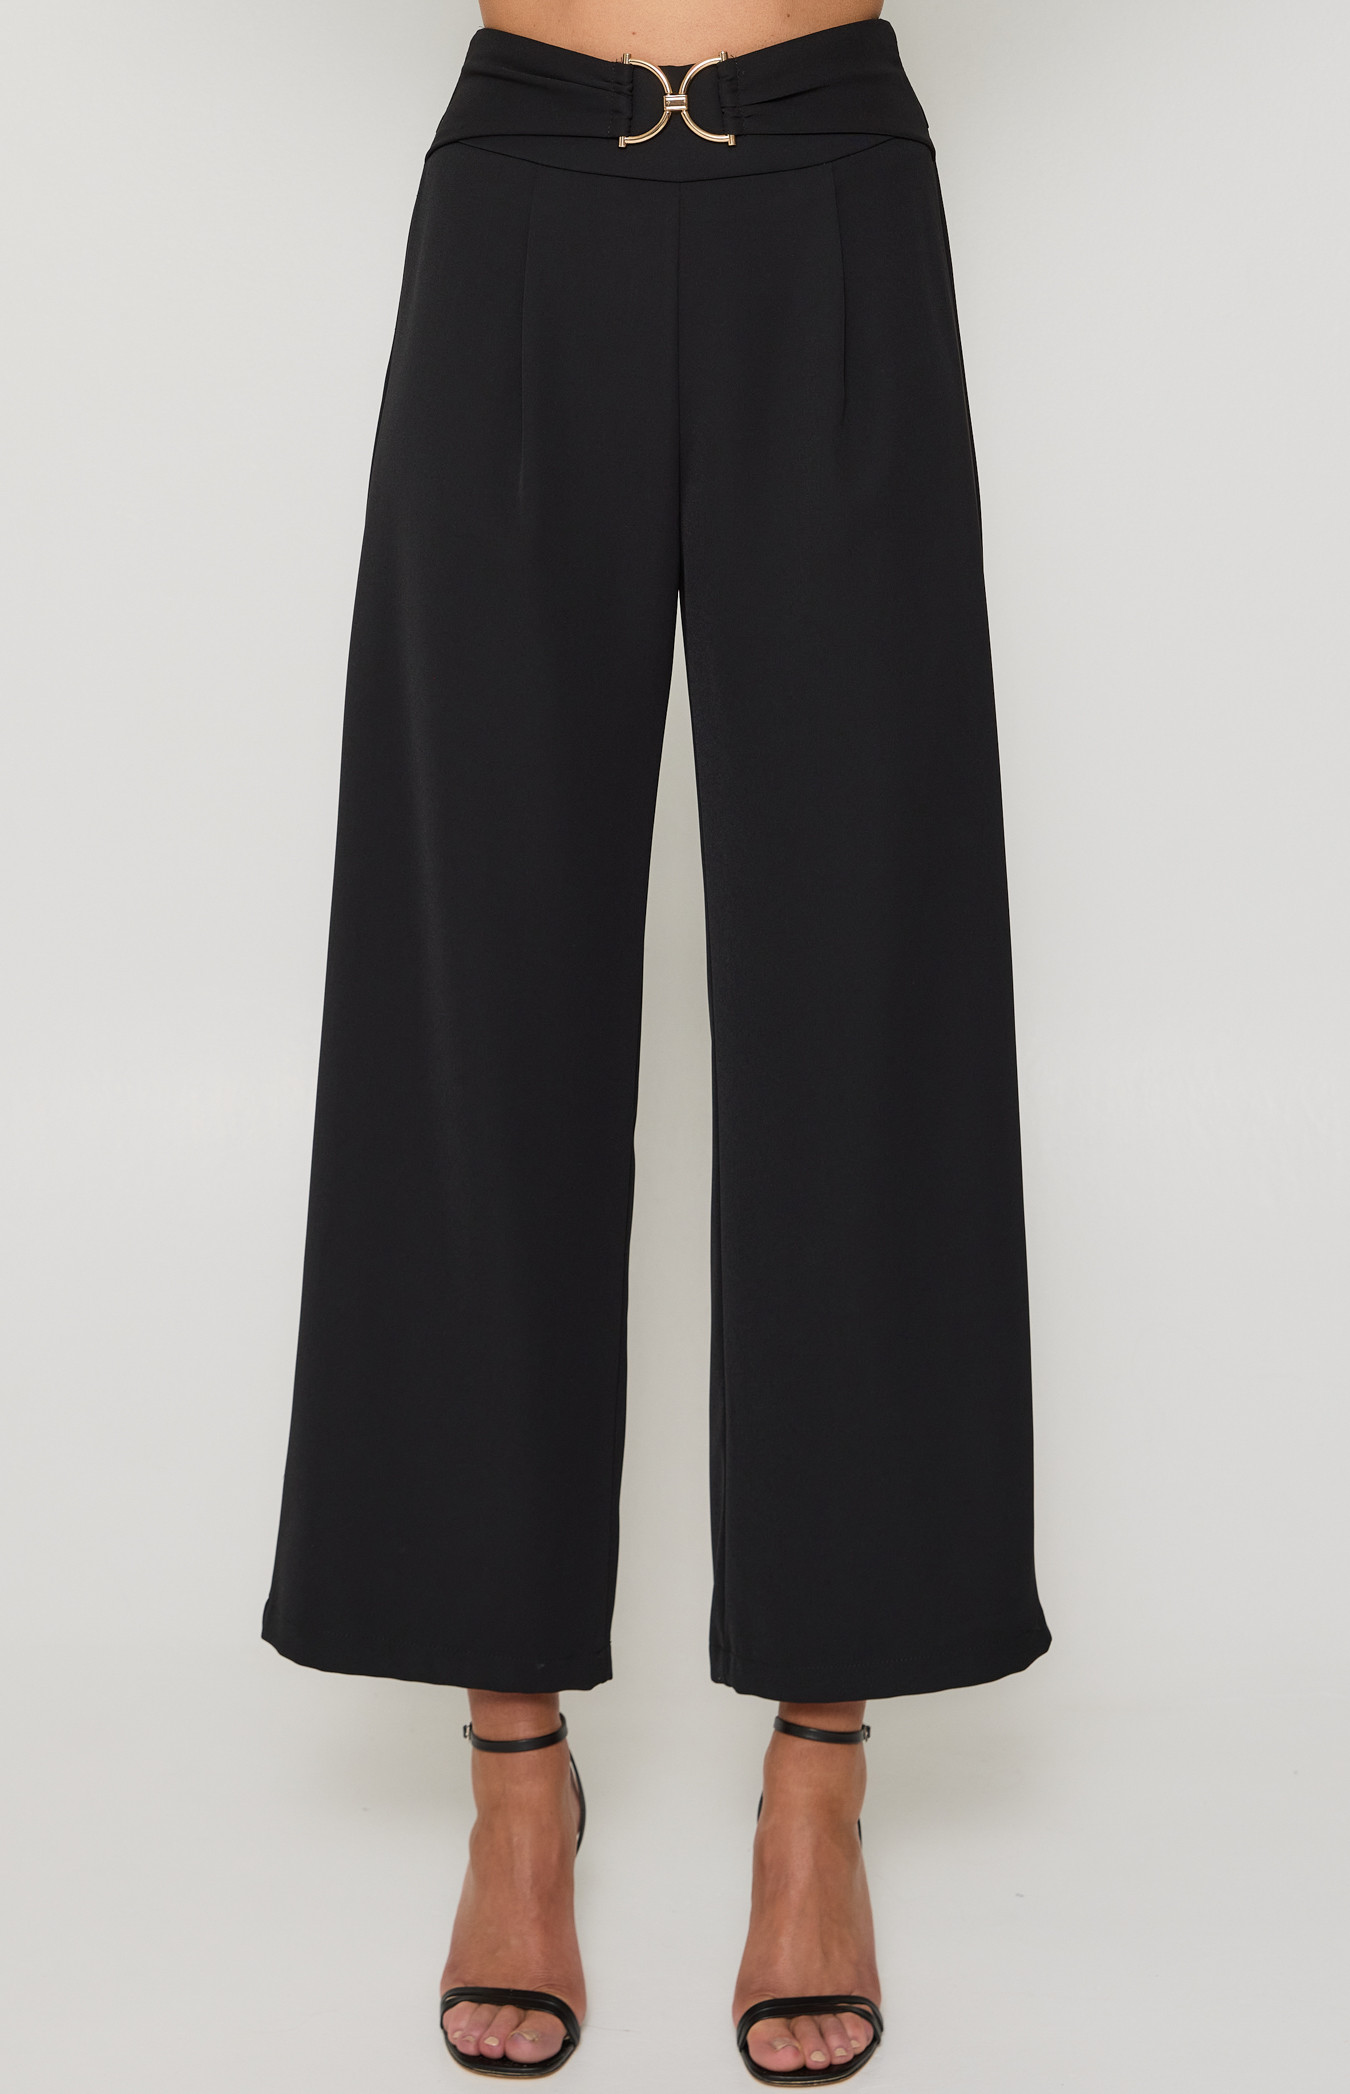 High Waisted Gold Buckle Detail Pants (SPA448A)